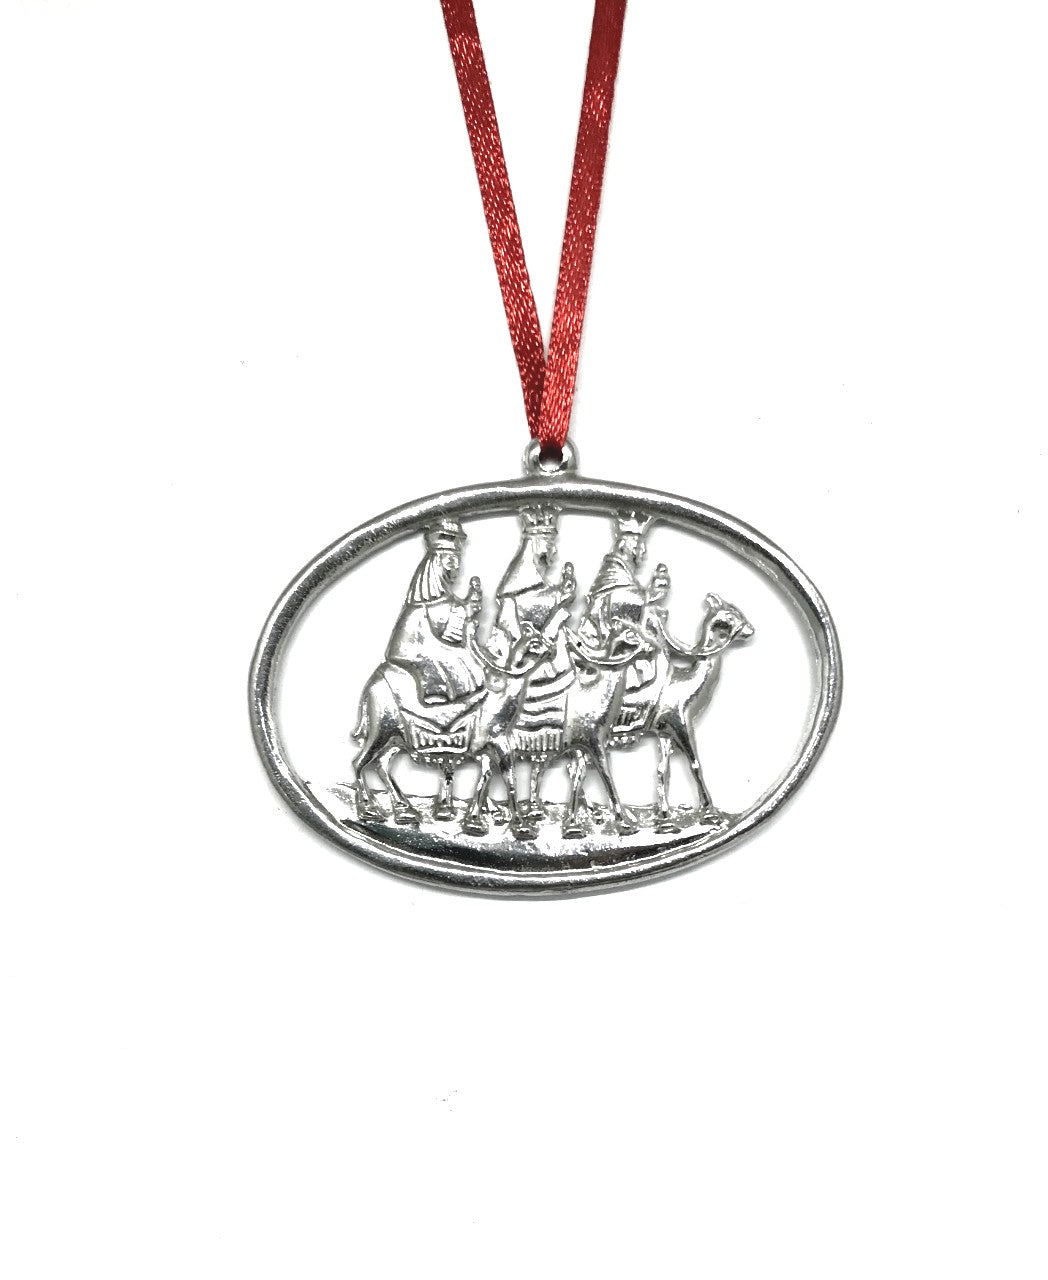 966 Wisemen Wise Men Nativity Religious Oval Christmas Ornament Pewter - House of Morgan Pewter